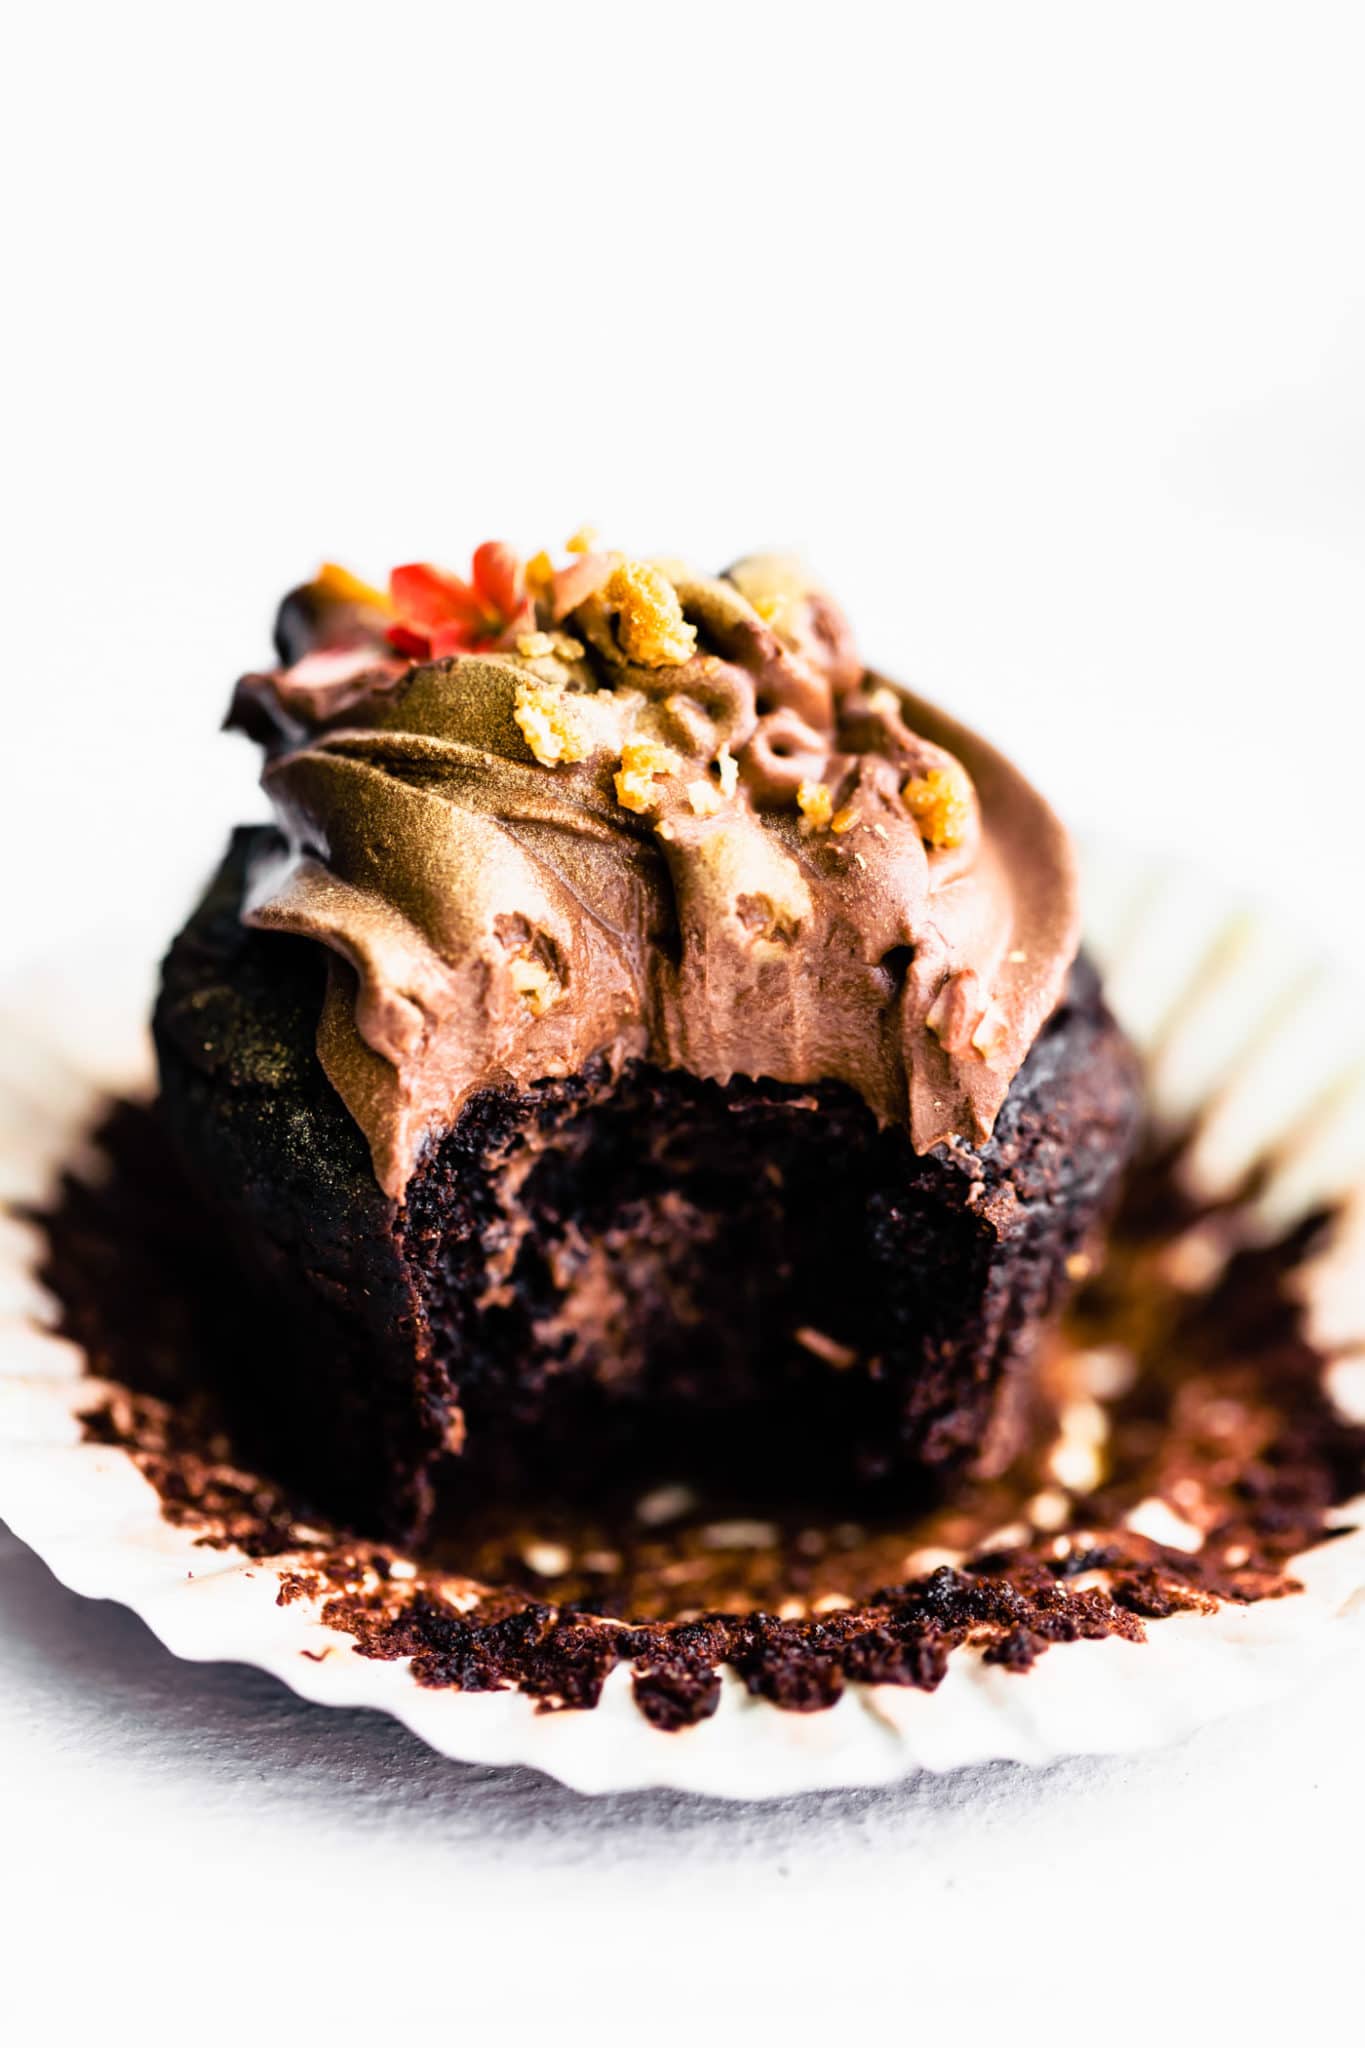 egg free chocolate cupcake with chocolate frosting with a bite taken out of the side